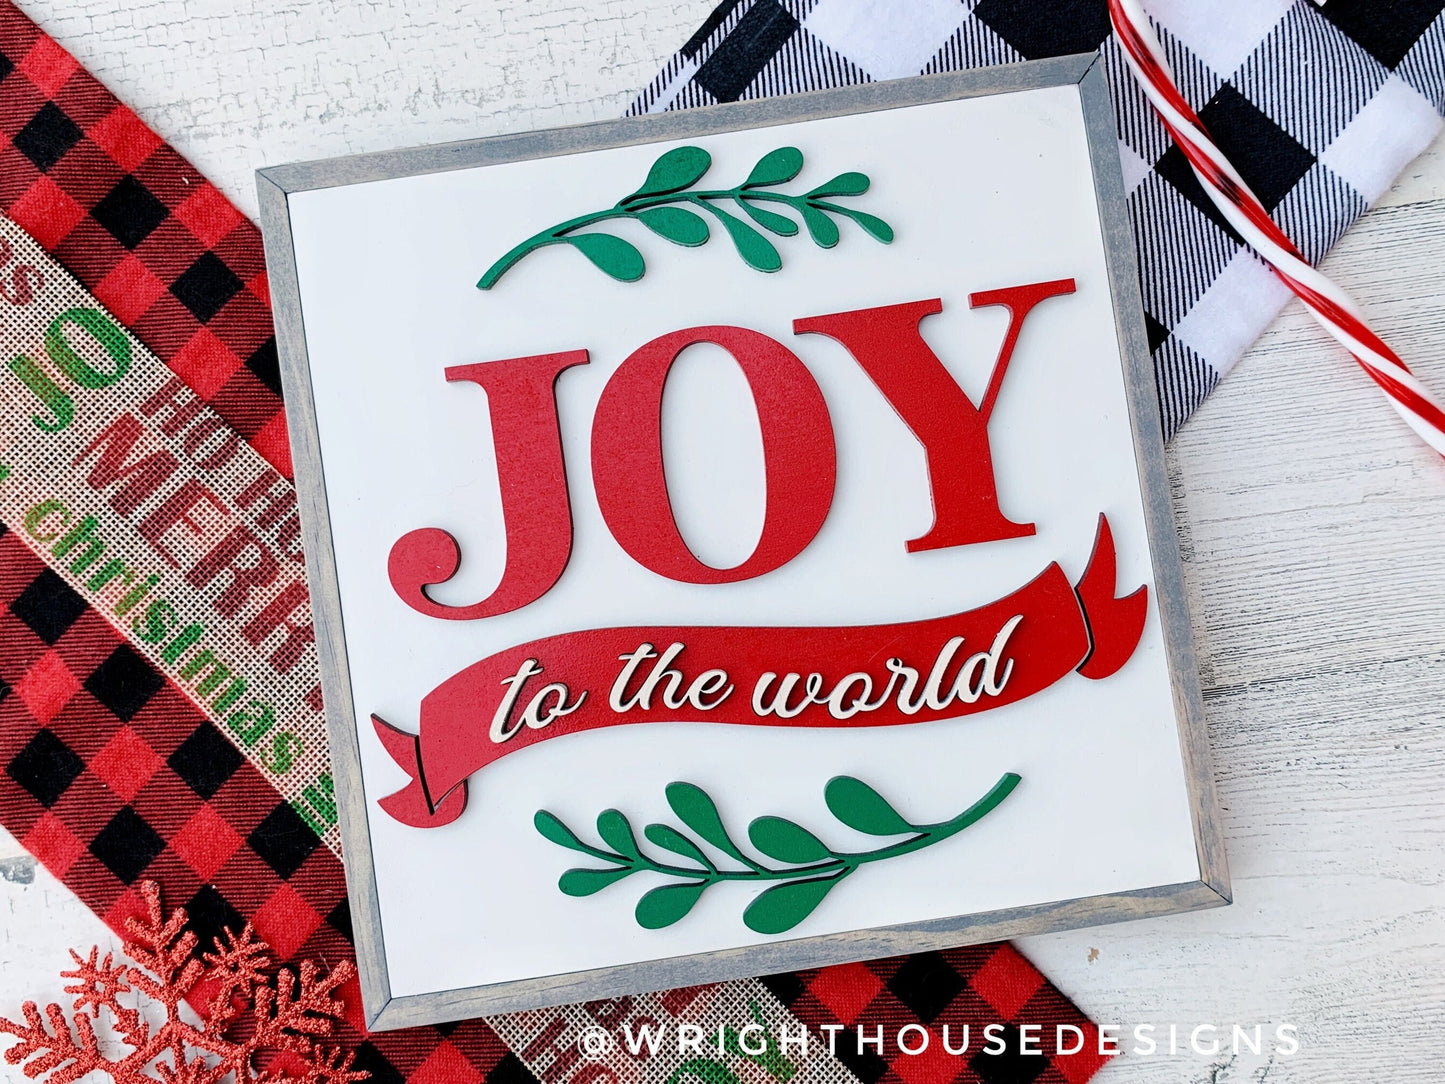 Joy To The World - Merry and Bright - Christmas Coffee Bar Sign - Seasonal Home and Kitchen Decor - Handcrafted Wooden Framedd Wall Art